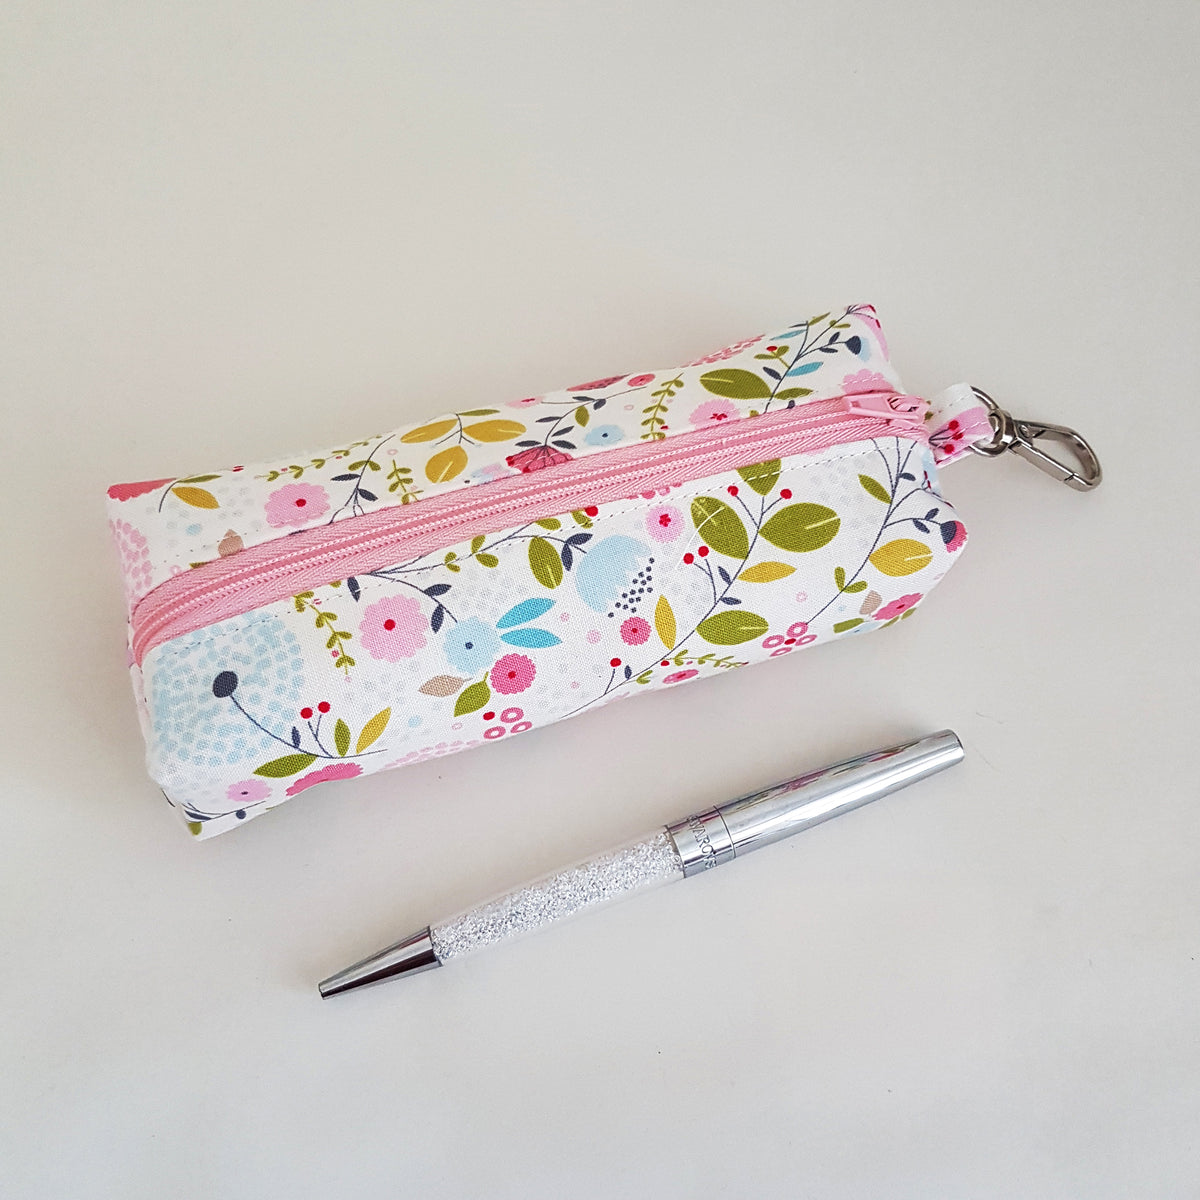 Thin Pencil Case Sewing Tutorial